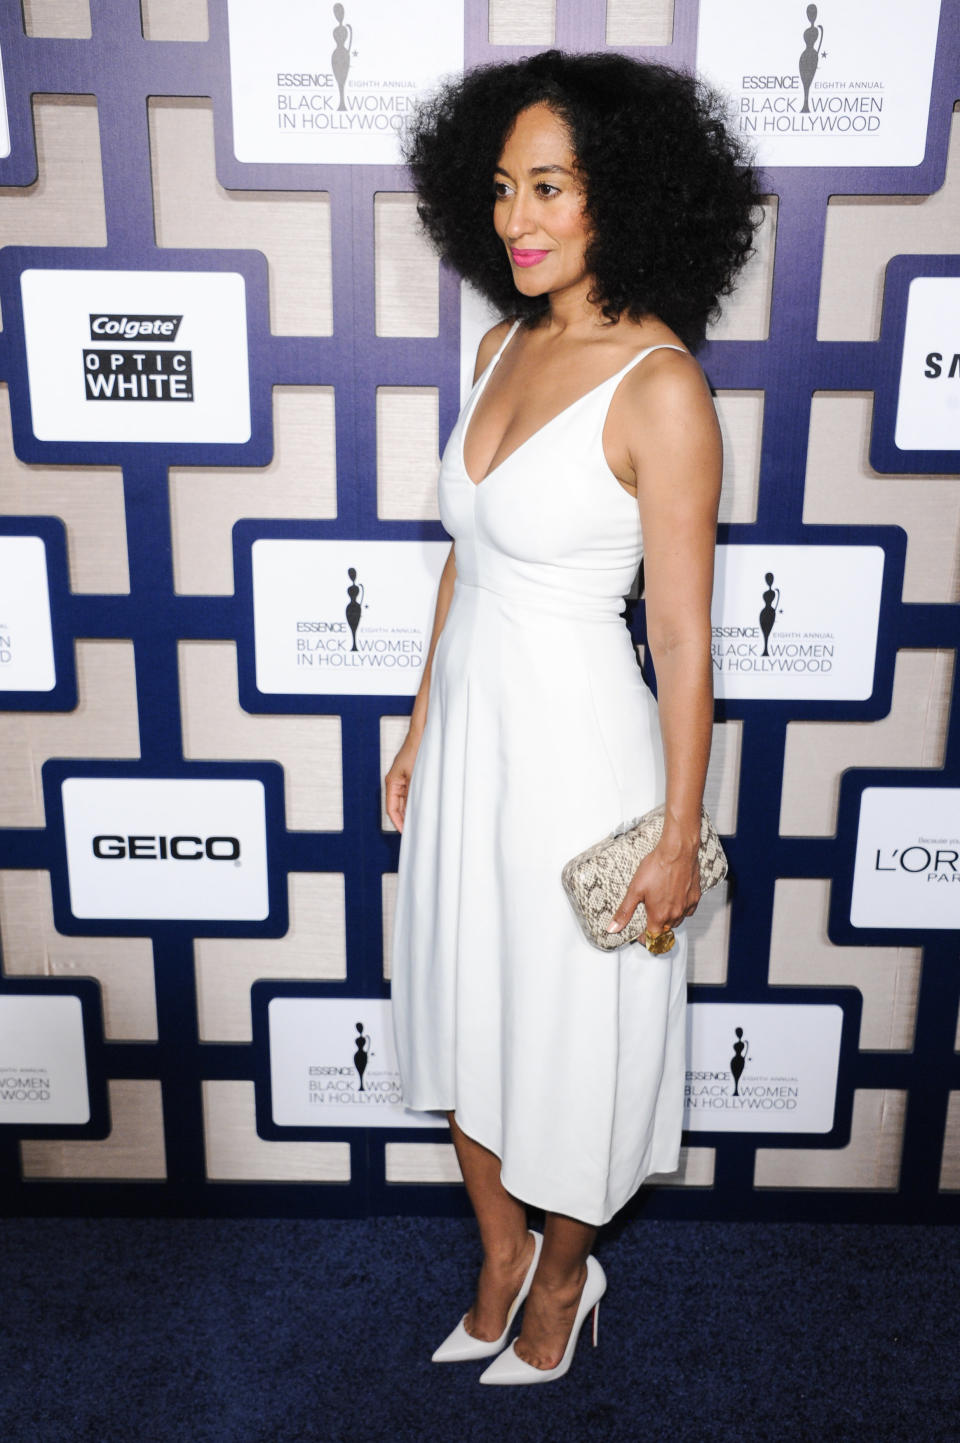 Tracee Ellis Ross arrives at the 8th Annual Essence Black Women In Hollywood Luncheon held at the Beverly Wilshire Hotel on Thursday, Feb. 19, 2015, in Beverly Hills, Calif. (Photo by Richard Shotwell/Invision/AP)